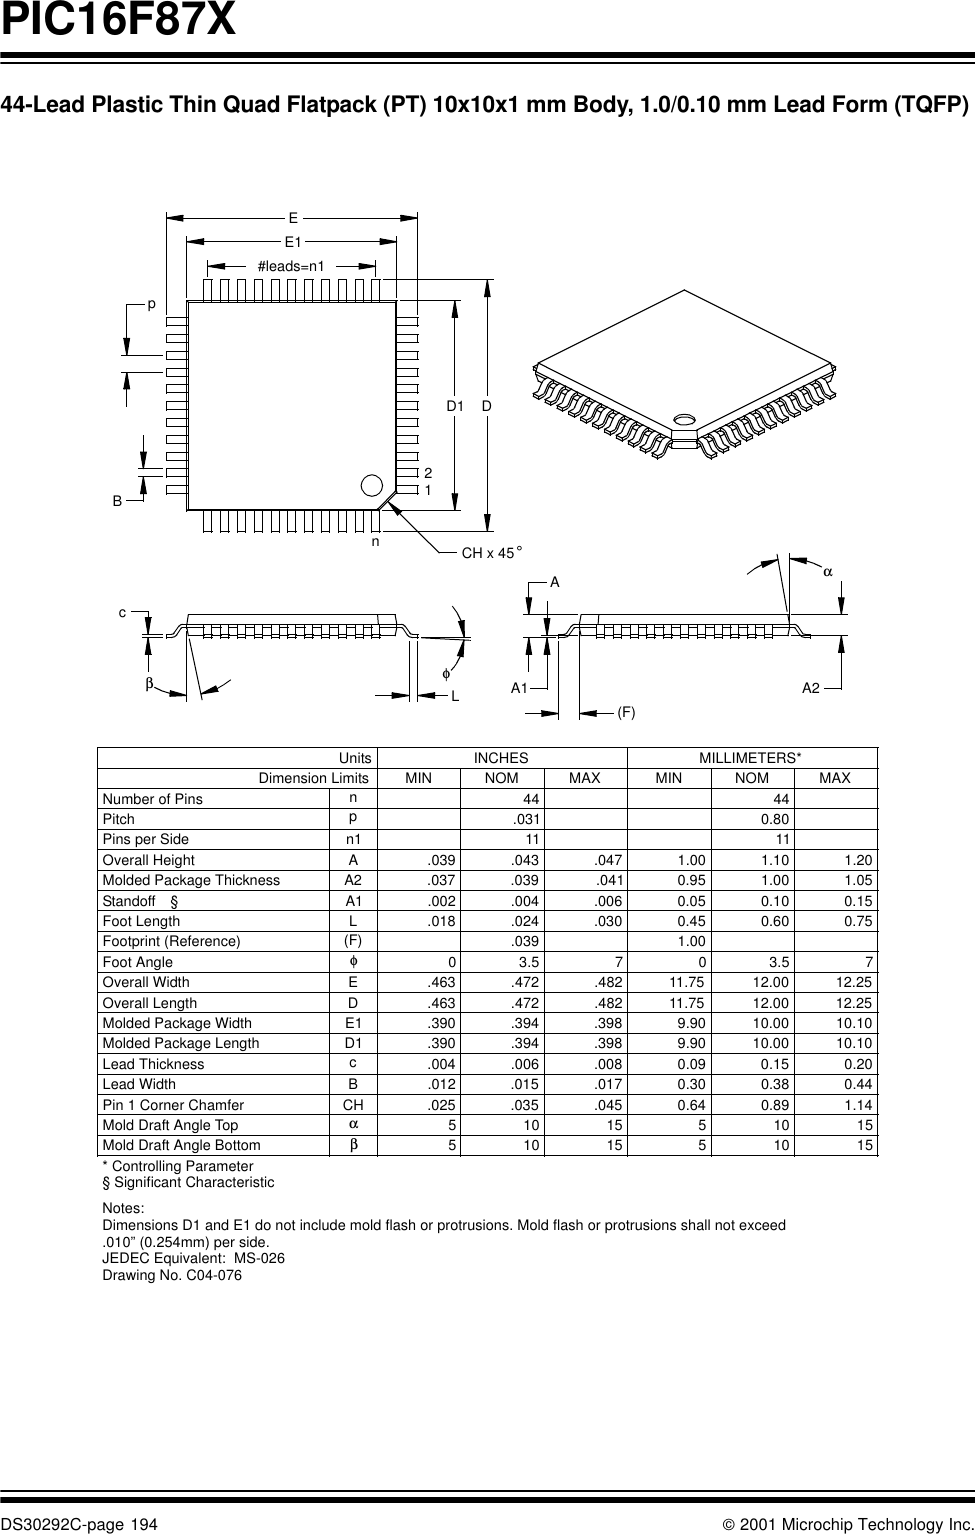 PIC16F87XDS30292C-page 194  2001 Microchip Technology Inc.44-Lead Plastic Thin Quad Flatpack (PT) 10x10x1 mm Body, 1.0/0.10 mm Lead Form (TQFP)* Controlling ParameterNotes:Dimensions D1 and E1 do not include mold flash or protrusions. Mold flash or protrusions shall not exceed .010” (0.254mm) per side.JEDEC Equivalent:  MS-026Drawing No. C04-0761.140.890.64.045.035.025CHPin 1 Corner Chamfer1.00.039(F)Footprint (Reference)(F)AA1 A2αEE1#leads=n1pBD1 Dn12φcβLUnits INCHES MILLIMETERS*Dimension Limits MIN NOM MAX MIN NOM MAXNumber of Pins n44 44Pitch p.031 0.80Overall Height A .039 .043 .047 1.00 1.10 1.20Molded Package Thickness A2 .037 .039 .041 0.95 1.00 1.05Standoff §A1 .002 .004 .006 0.05 0.10 0.15Foot Length L .018 .024 .030 0.45 0.60 0.75Foot Angle φ03.5 7 03.5 7Overall Width E .463 .472 .482 11.75 12.00 12.25Overall Length D .463 .472 .482 11.75 12.00 12.25Molded Package Width E1 .390 .394 .398 9.90 10.00 10.10Molded Package Length D1 .390 .394 .398 9.90 10.00 10.10Pins per Side n1 11 11Lead Thickness c.004 .006 .008 0.09 0.15 0.20Lead Width B .012 .015 .017 0.30 0.38 0.44Mold Draft Angle Top α51015 51015Mold Draft Angle Bottom β51015 51015CH x 45 °§ Significant Characteristic